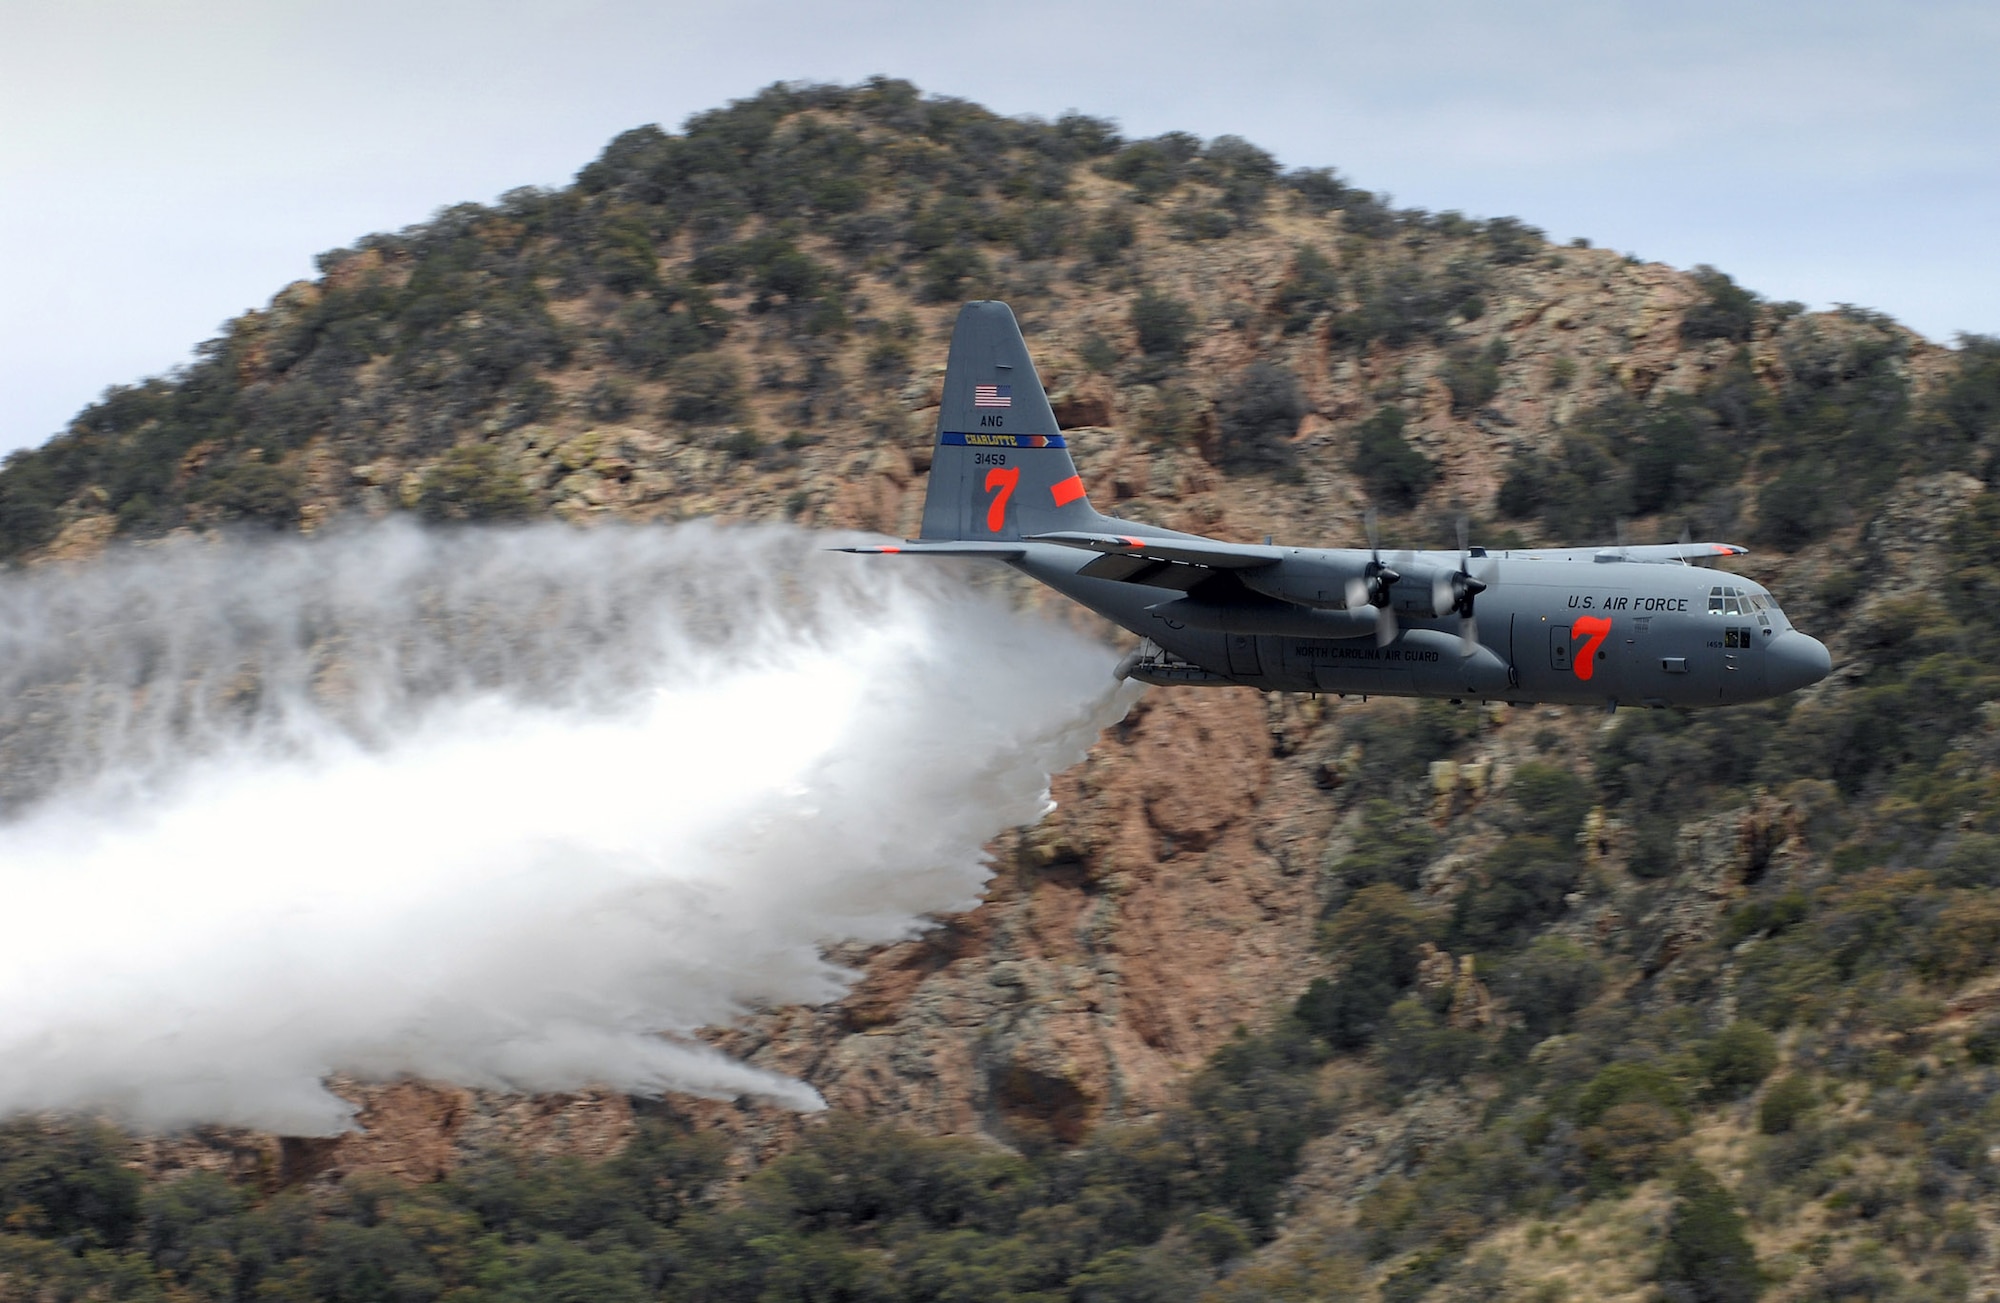 A C-130 Hercules drops "fire retardant" from a Modular Airborne Fire Fighting System near Tucson, Ariz., May 8 to finalize MAFFS certification by the U.S. Forestry Service.  Air Force Reserve and Air National Guard aircrews flew training missions from sun up to sundown in the annual event. (U.S. Air Force photo/Tech. Sgt. Alex Koenig)